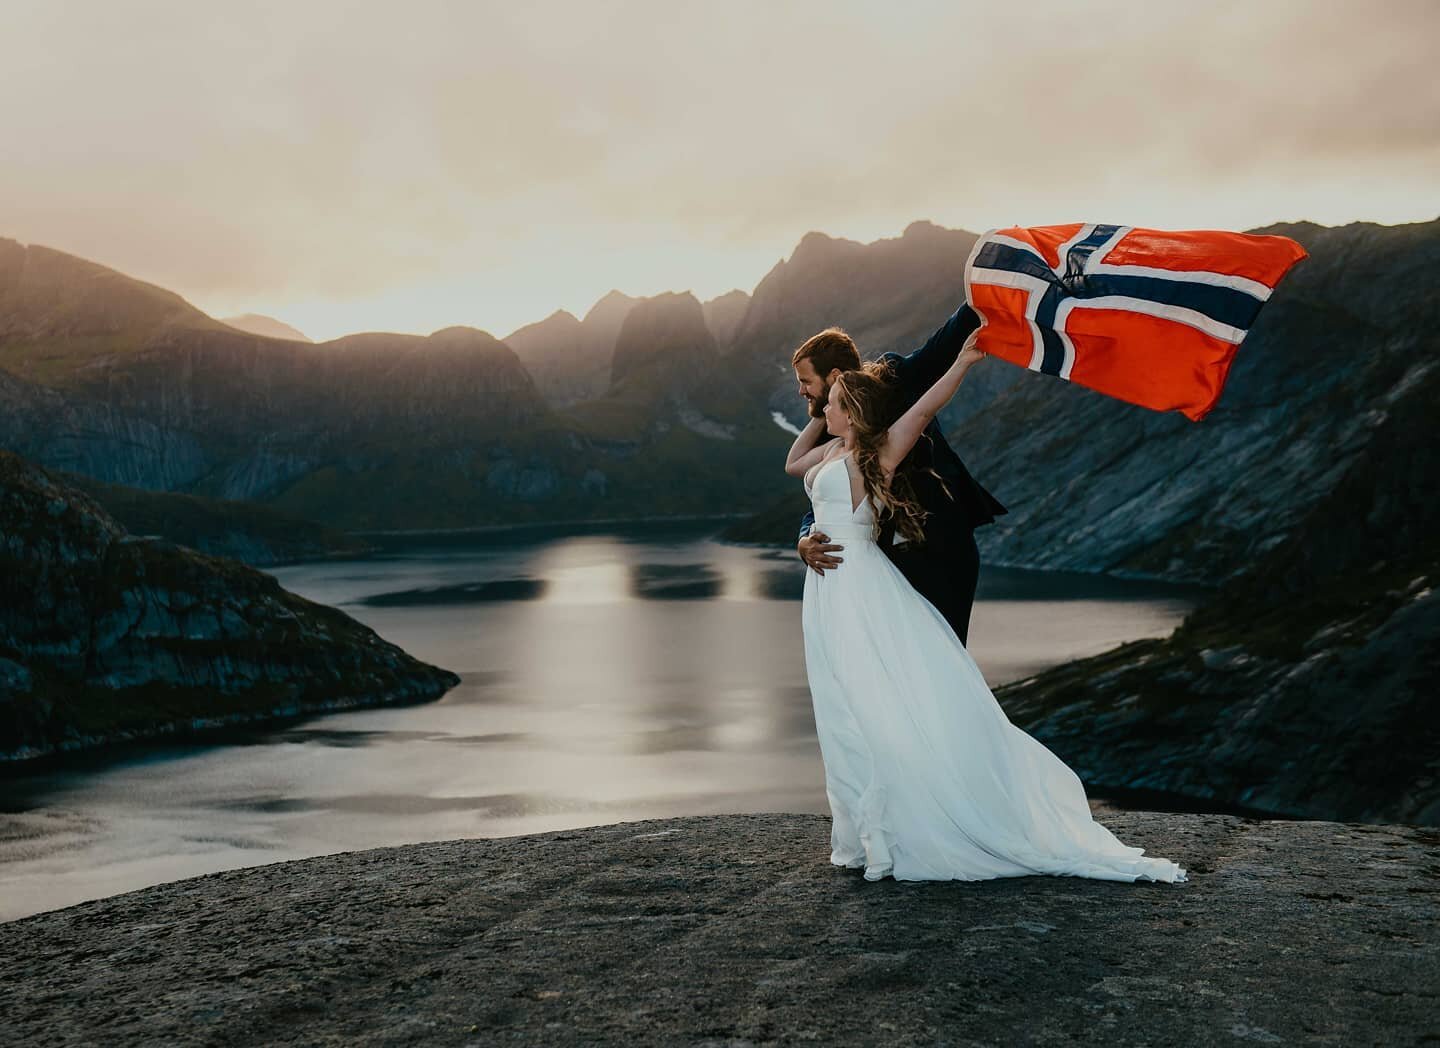 🇳🇴 Happy Norway Day!! 🇳🇴

I brought an old vintage norwegian flag with me in my backpack and Katie and Rasmus loved it! So we took some photos with it and they told me I could post it today for their indepence day! 🥰

Follow them for some awesom